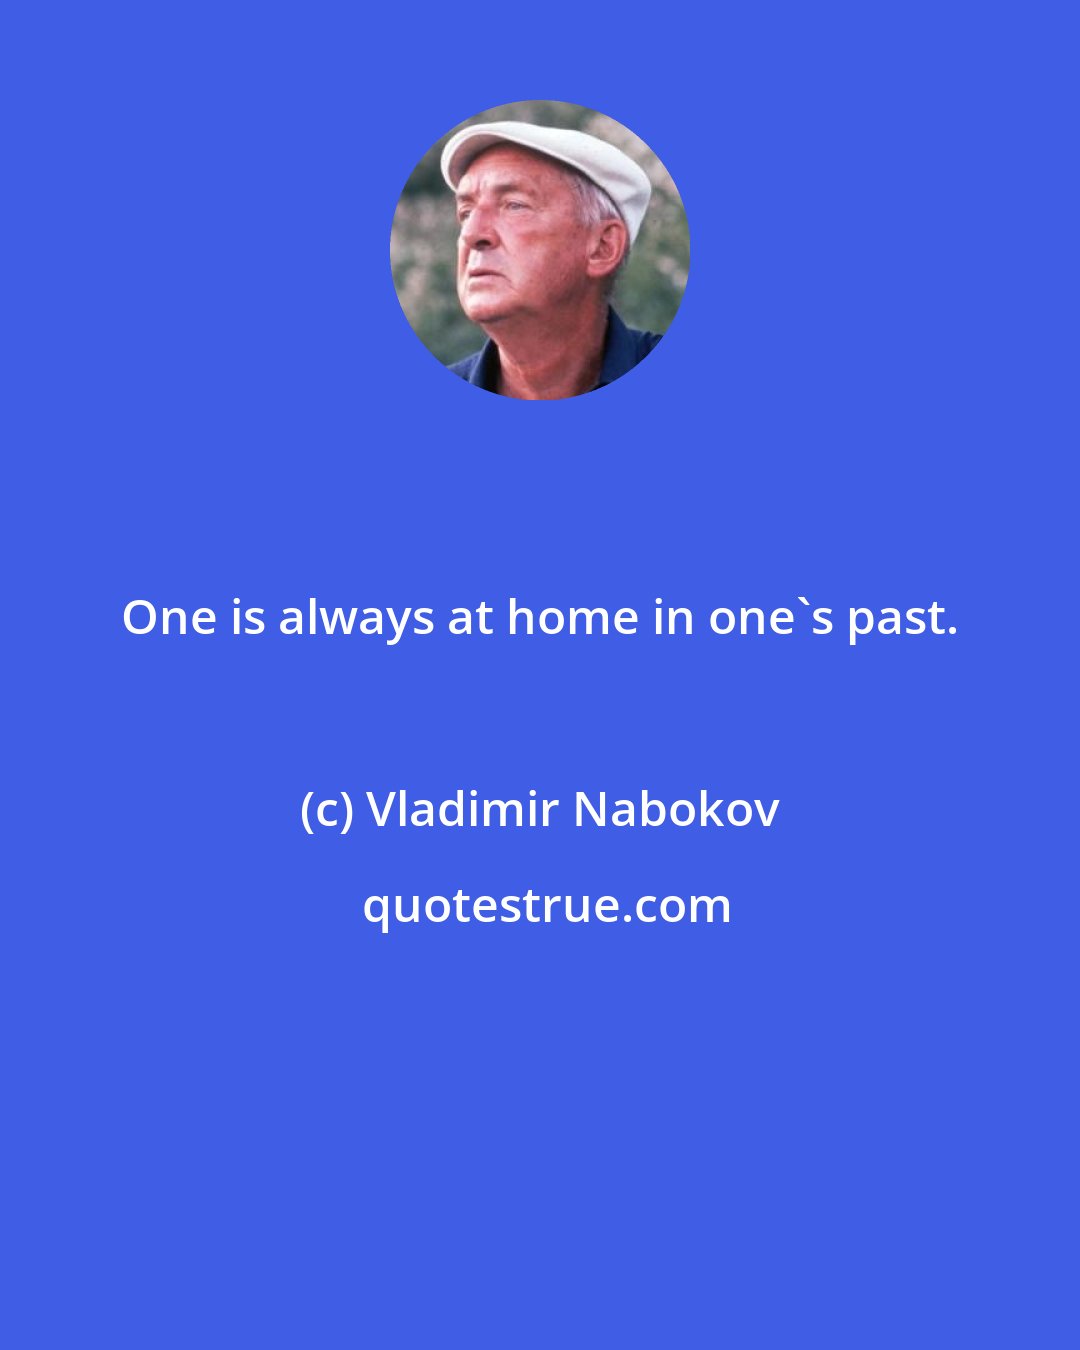 Vladimir Nabokov: One is always at home in one's past.